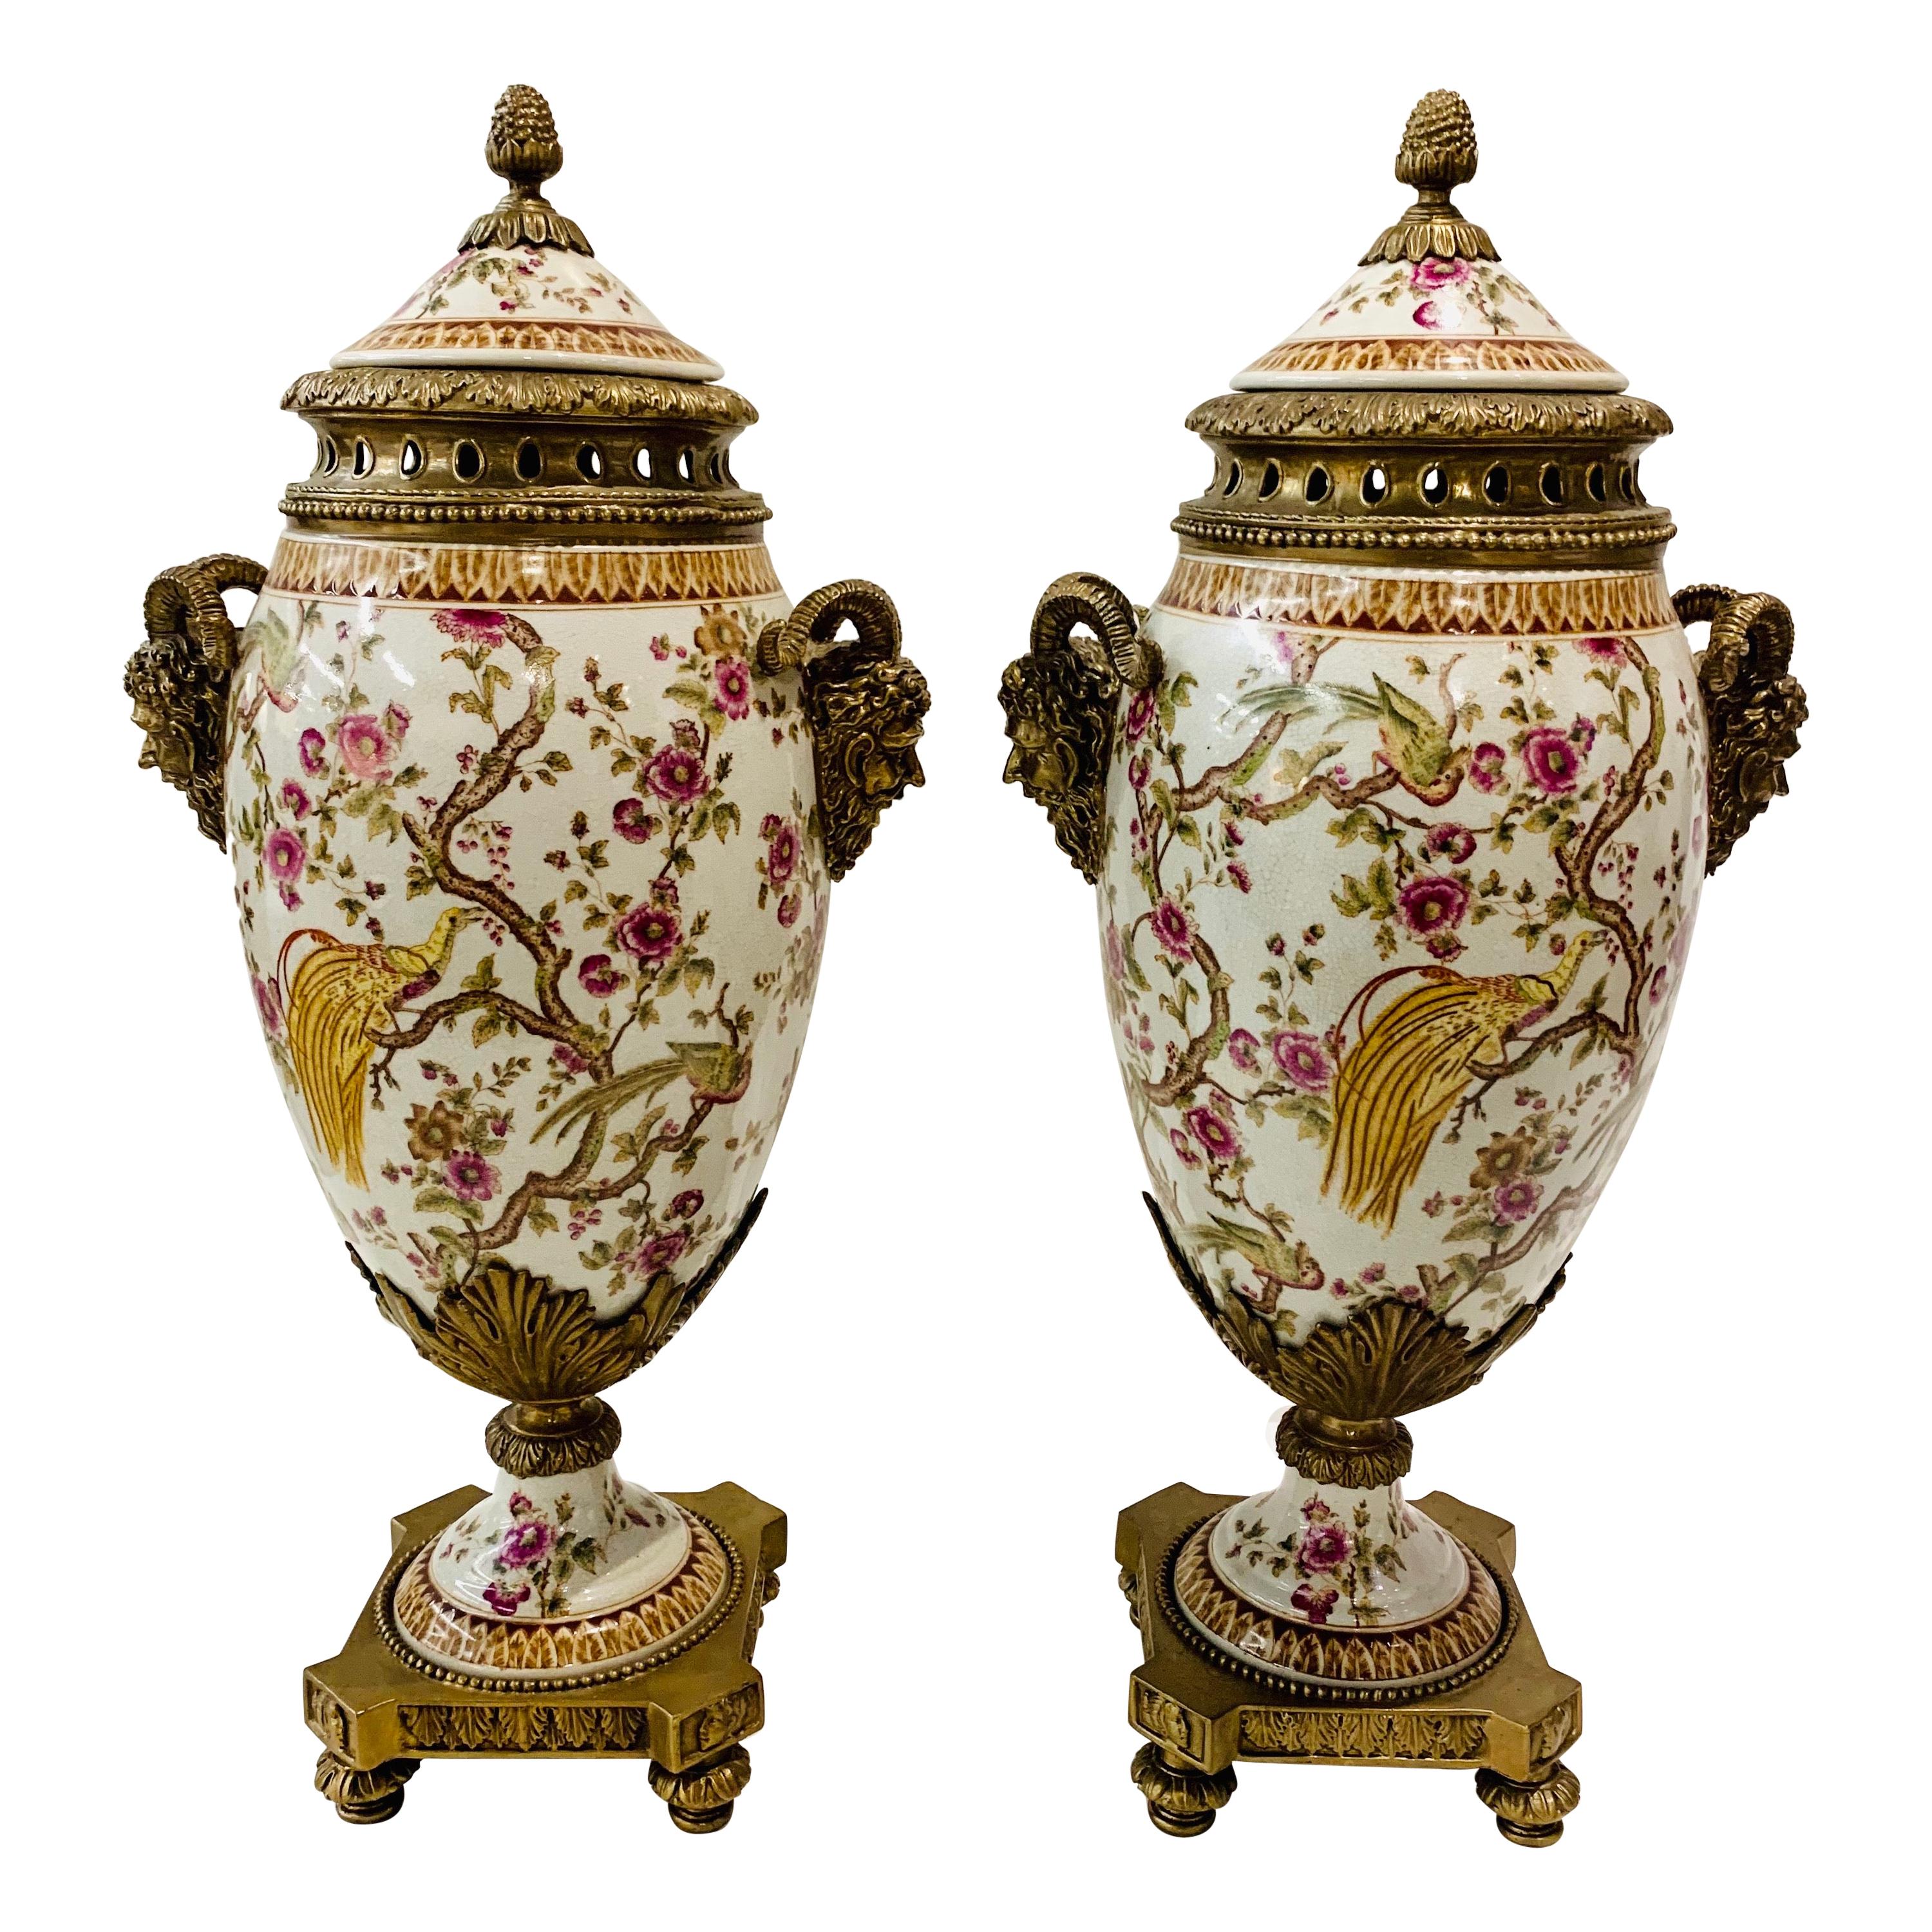 Porcelain and Bronze Covered Urns with Figural Ram’s Head Handles